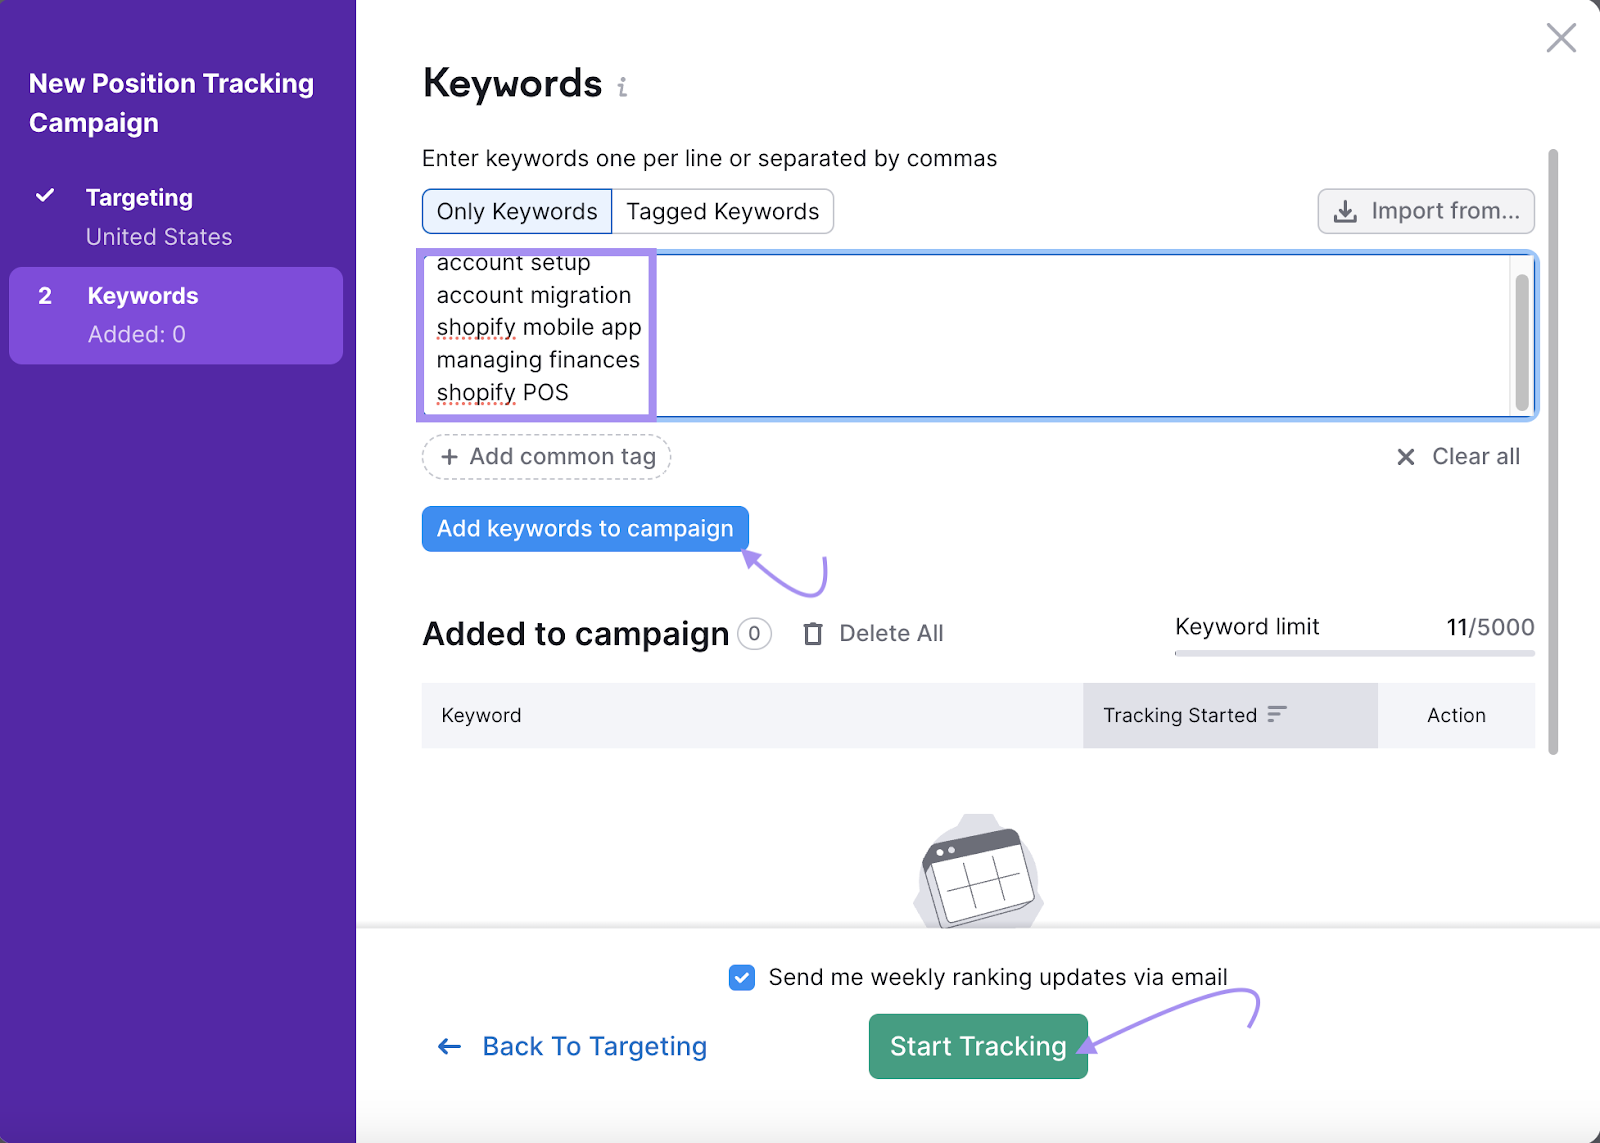 "Keywords" page in Position Tracking settings